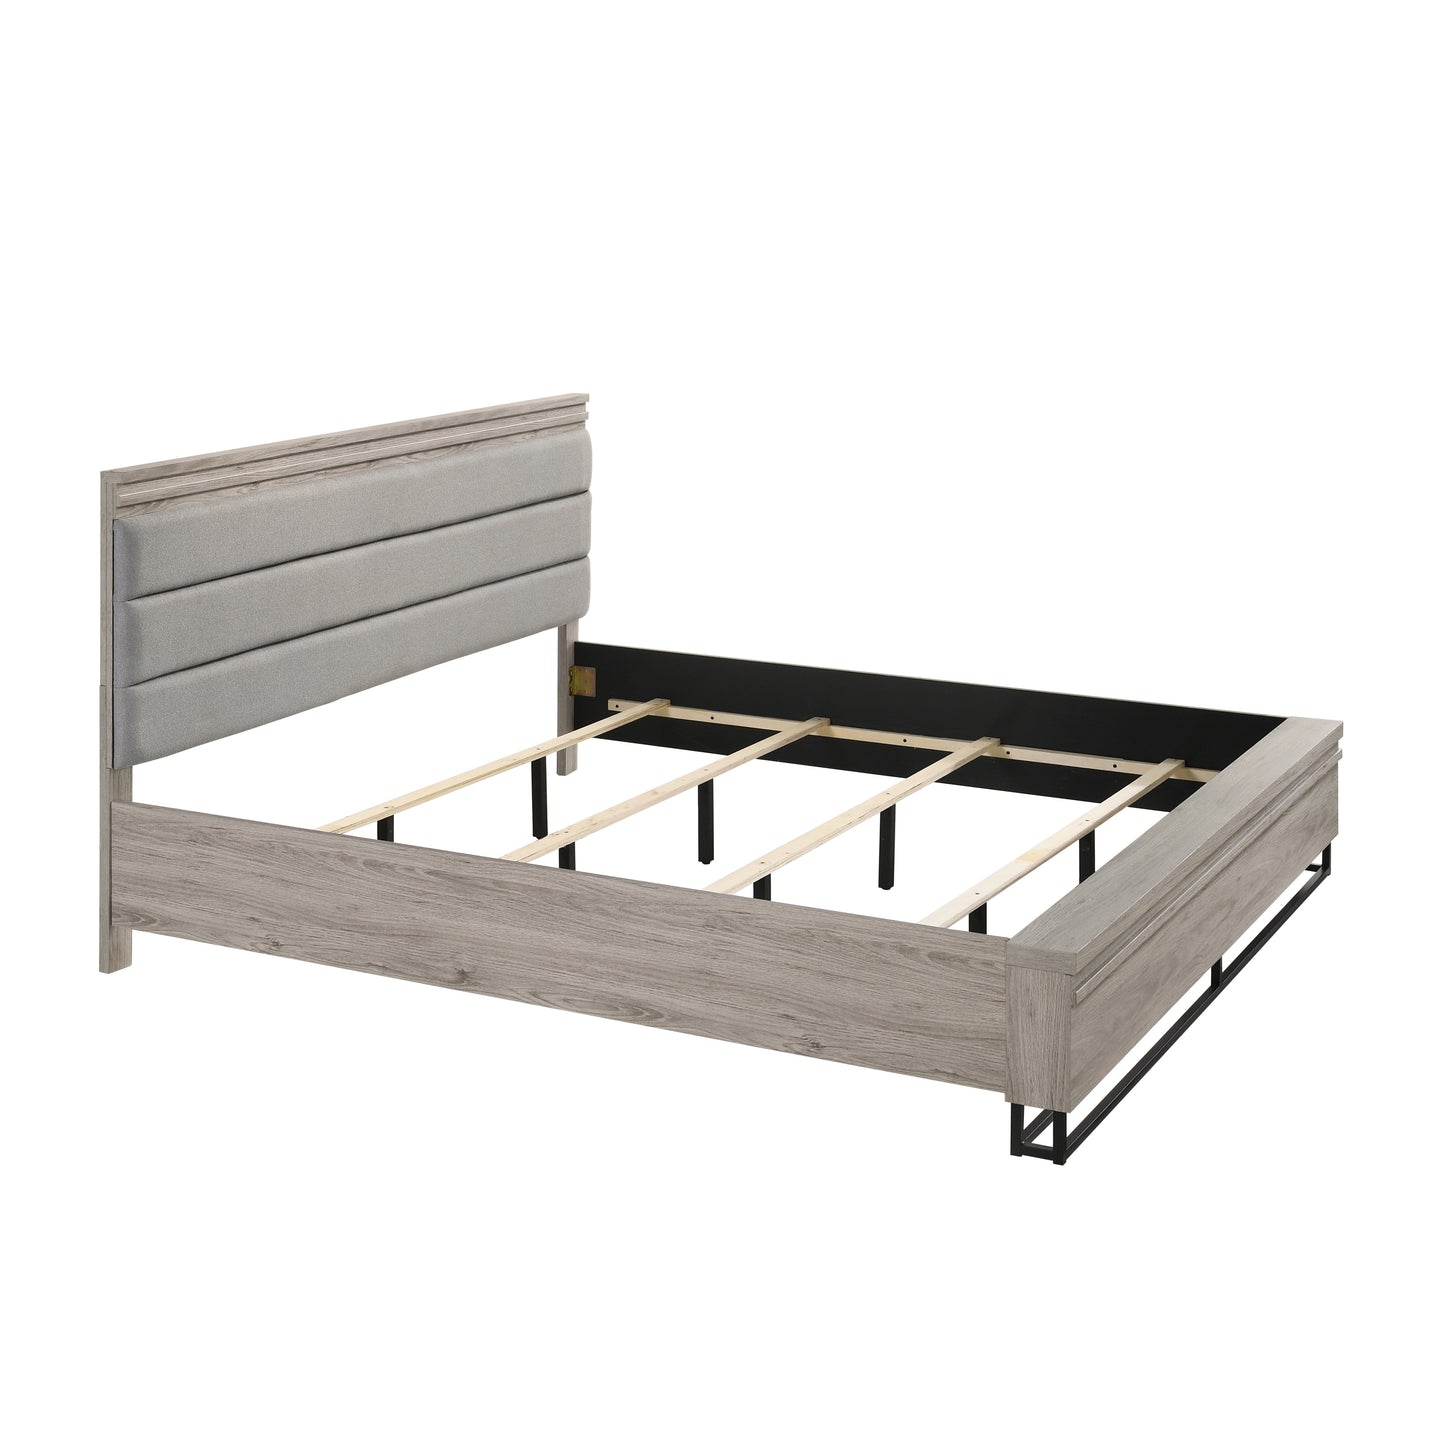 Alvear Upholstered Wood Panel Bed, Weathered Gray